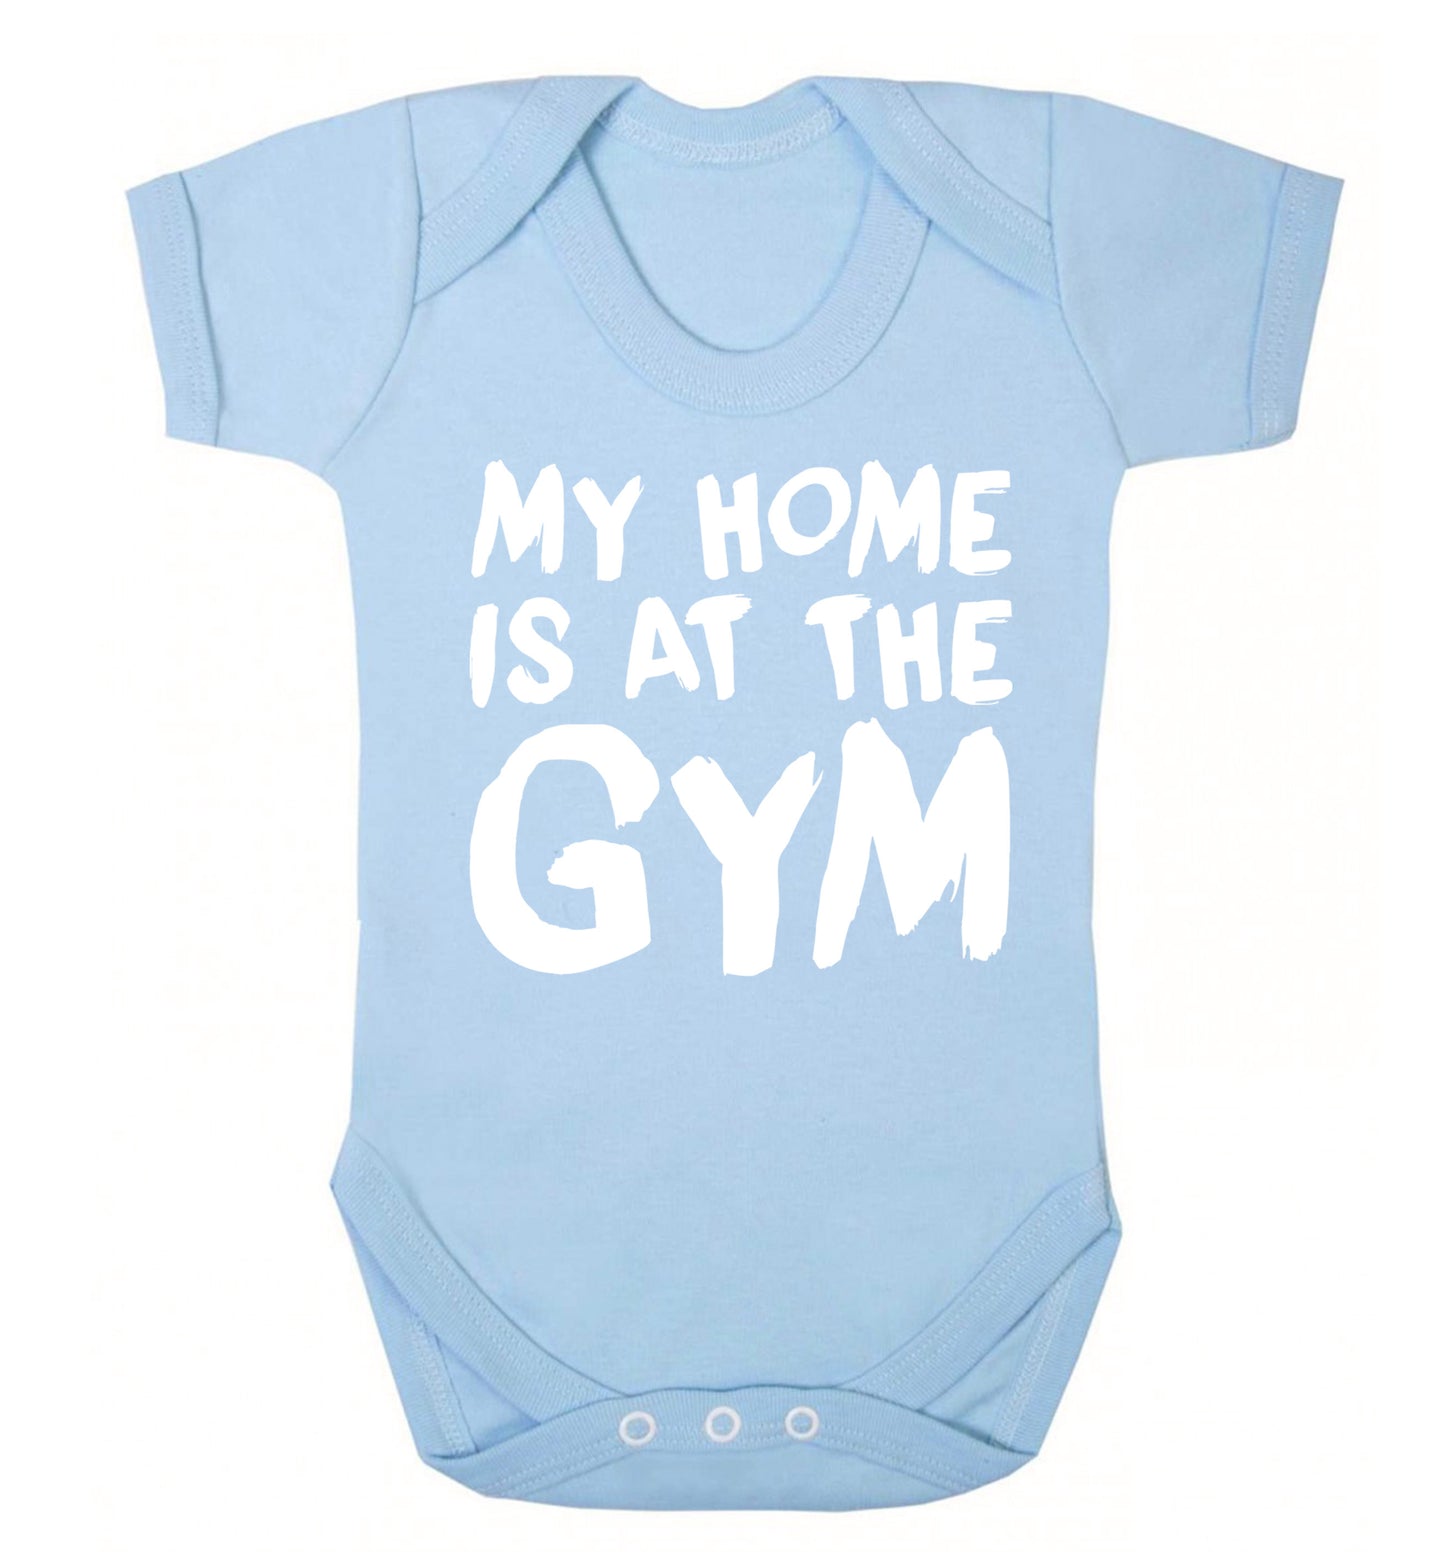 My home is at the gym Baby Vest pale blue 18-24 months